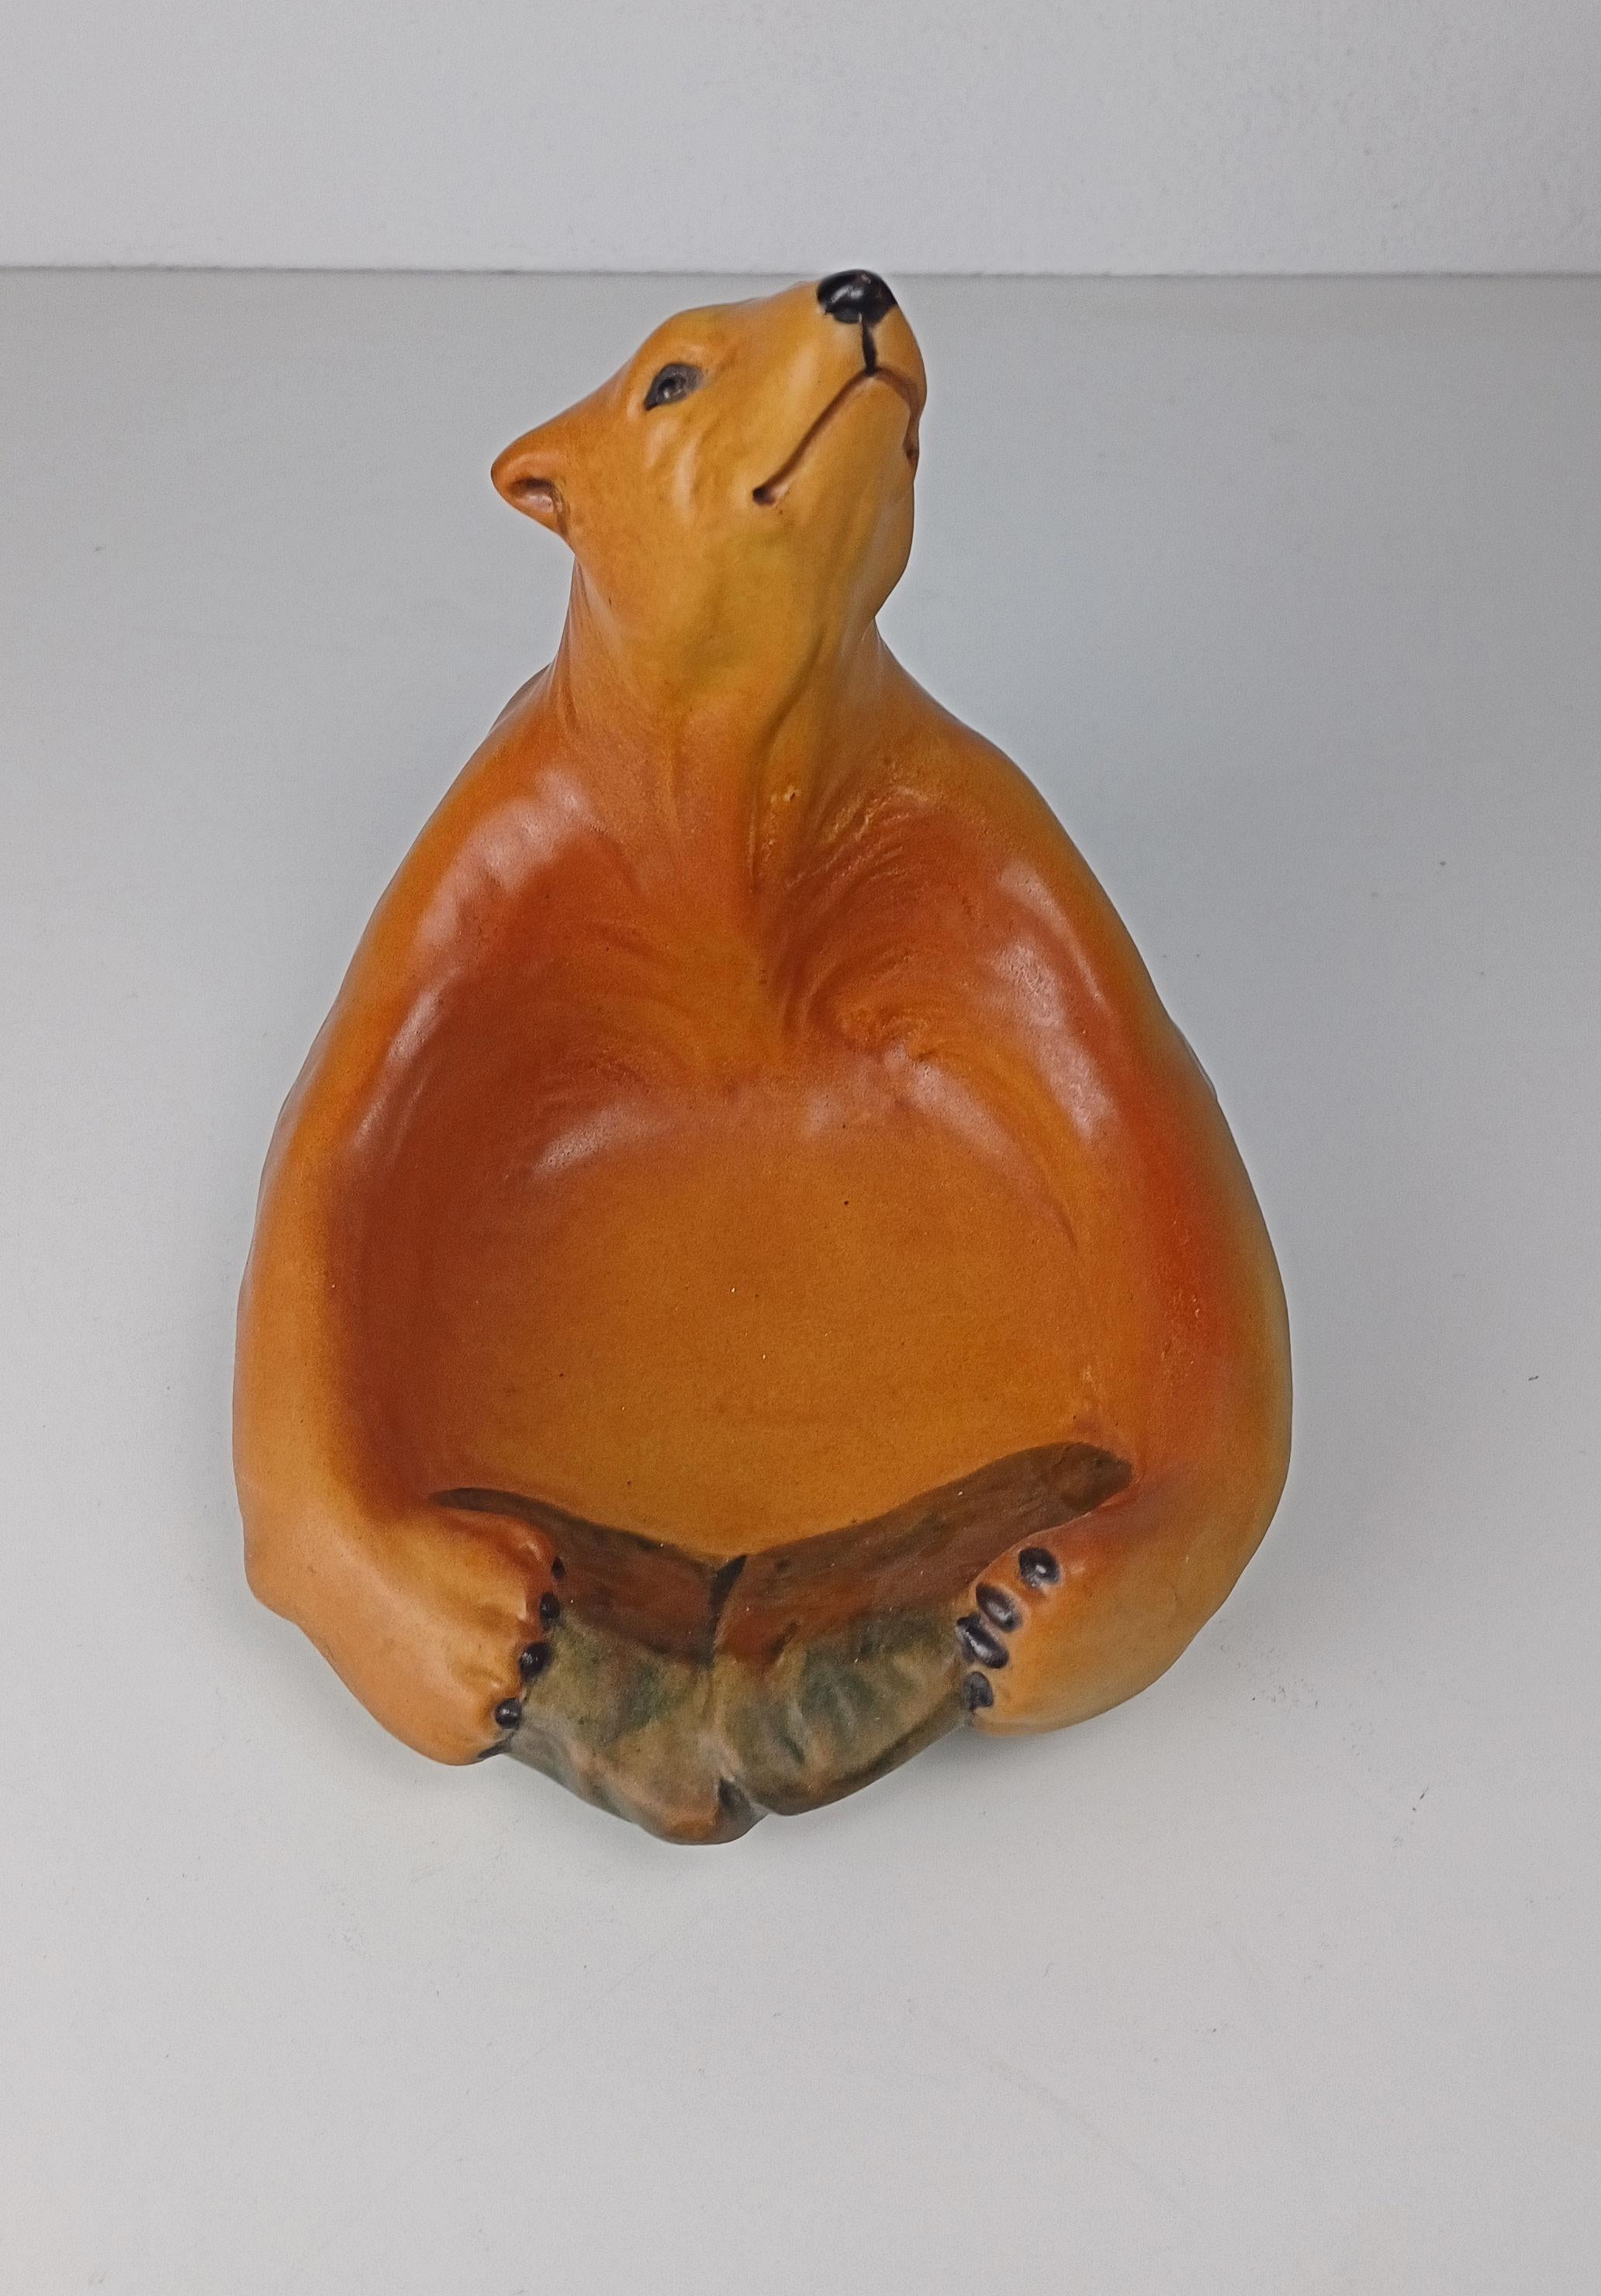 1920's Danish Art Nouveau Handcrafted Icebear Bowl - Ash Tray by P. Ipsens Enke For Sale 1